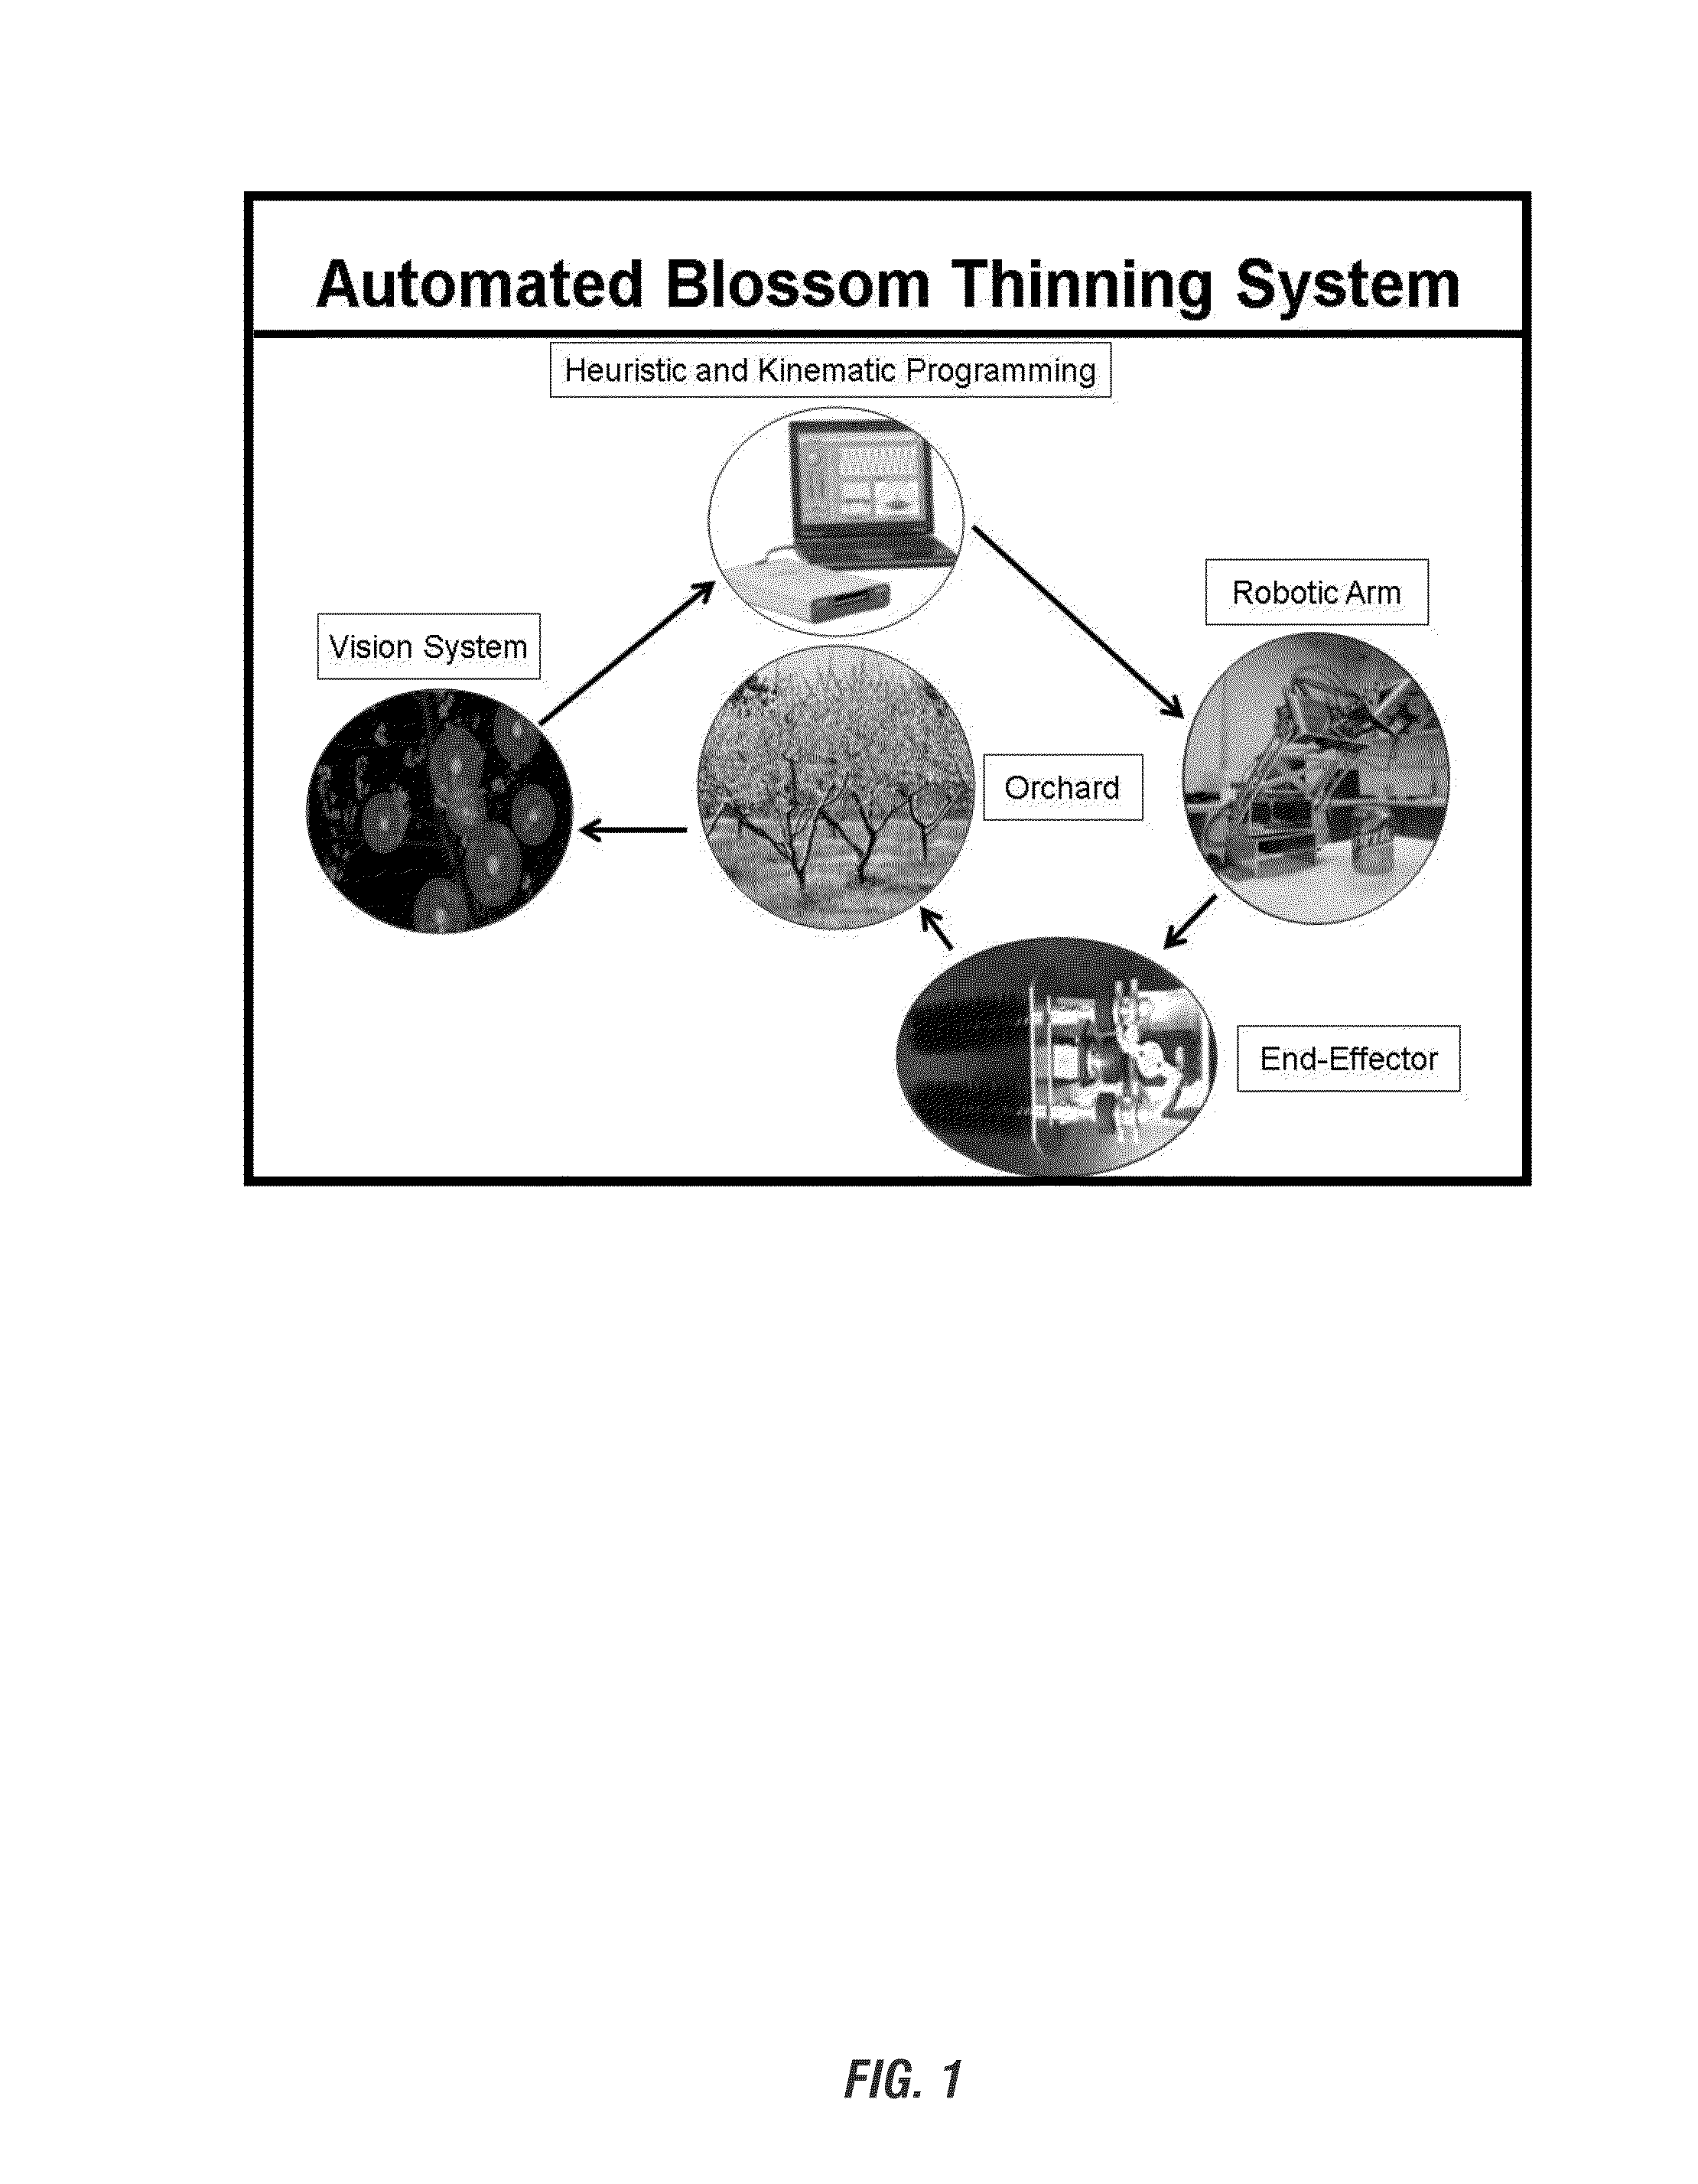 Selective automated blossom thinning